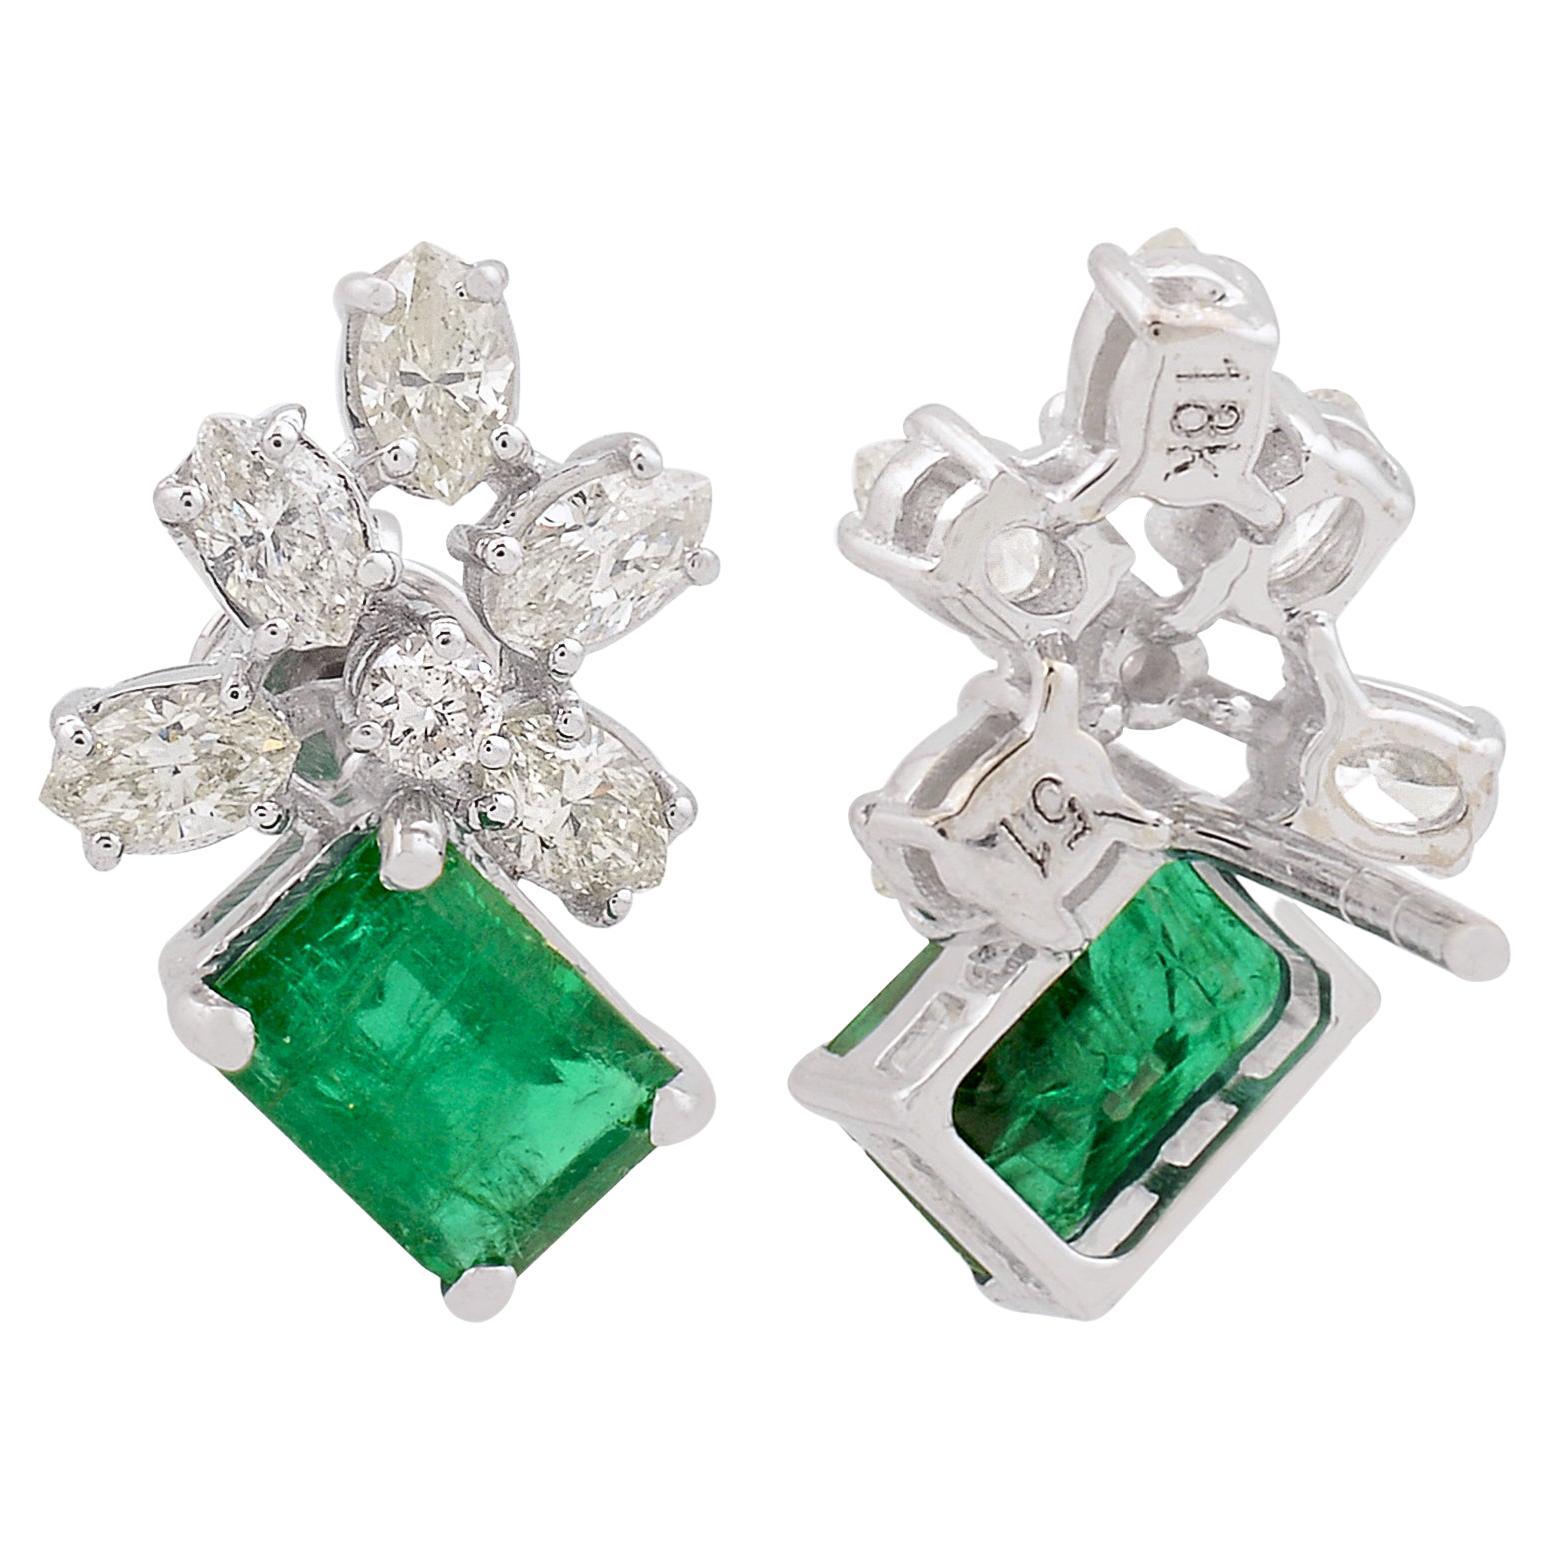 Natural Emerald Stud Earrings SI Clarity HI Color Diamond 18k White Gold Jewelry